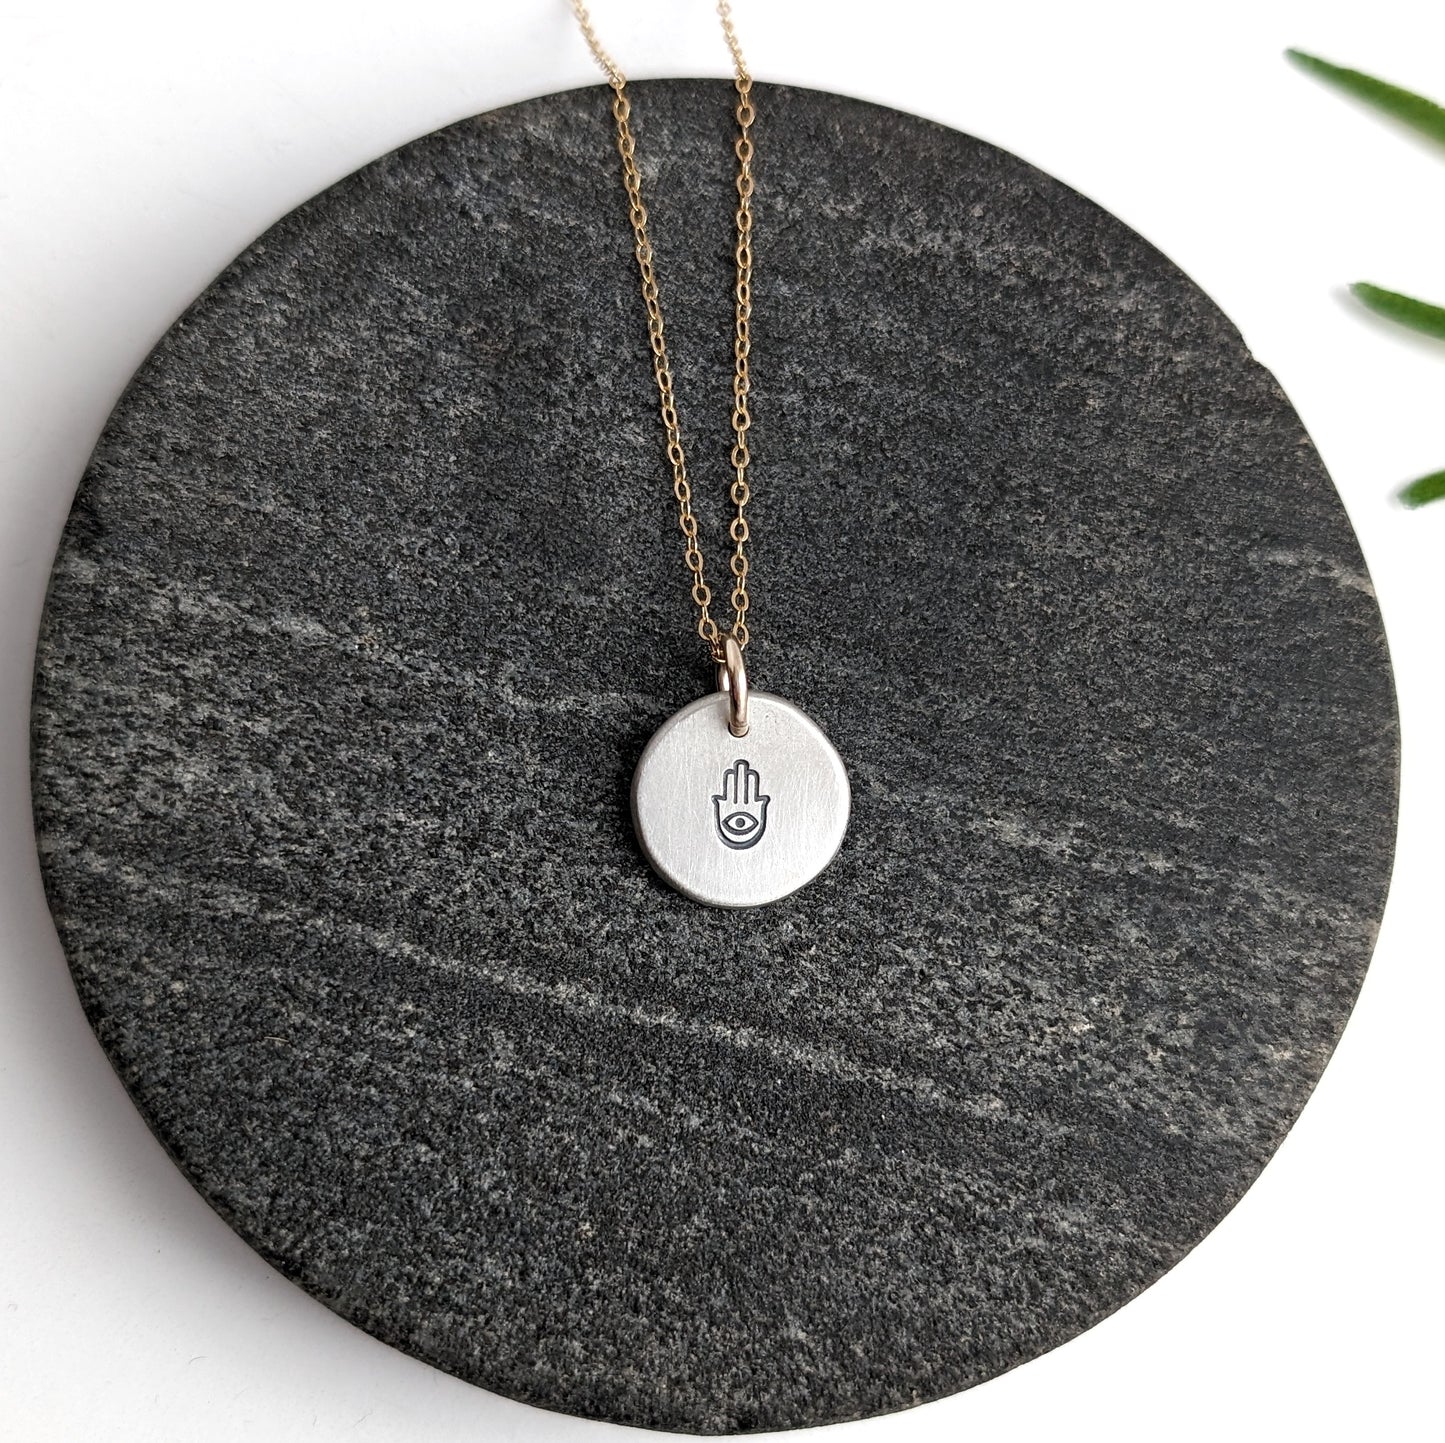 Stamped Flat Pebble Mixed Metal Charm Necklace